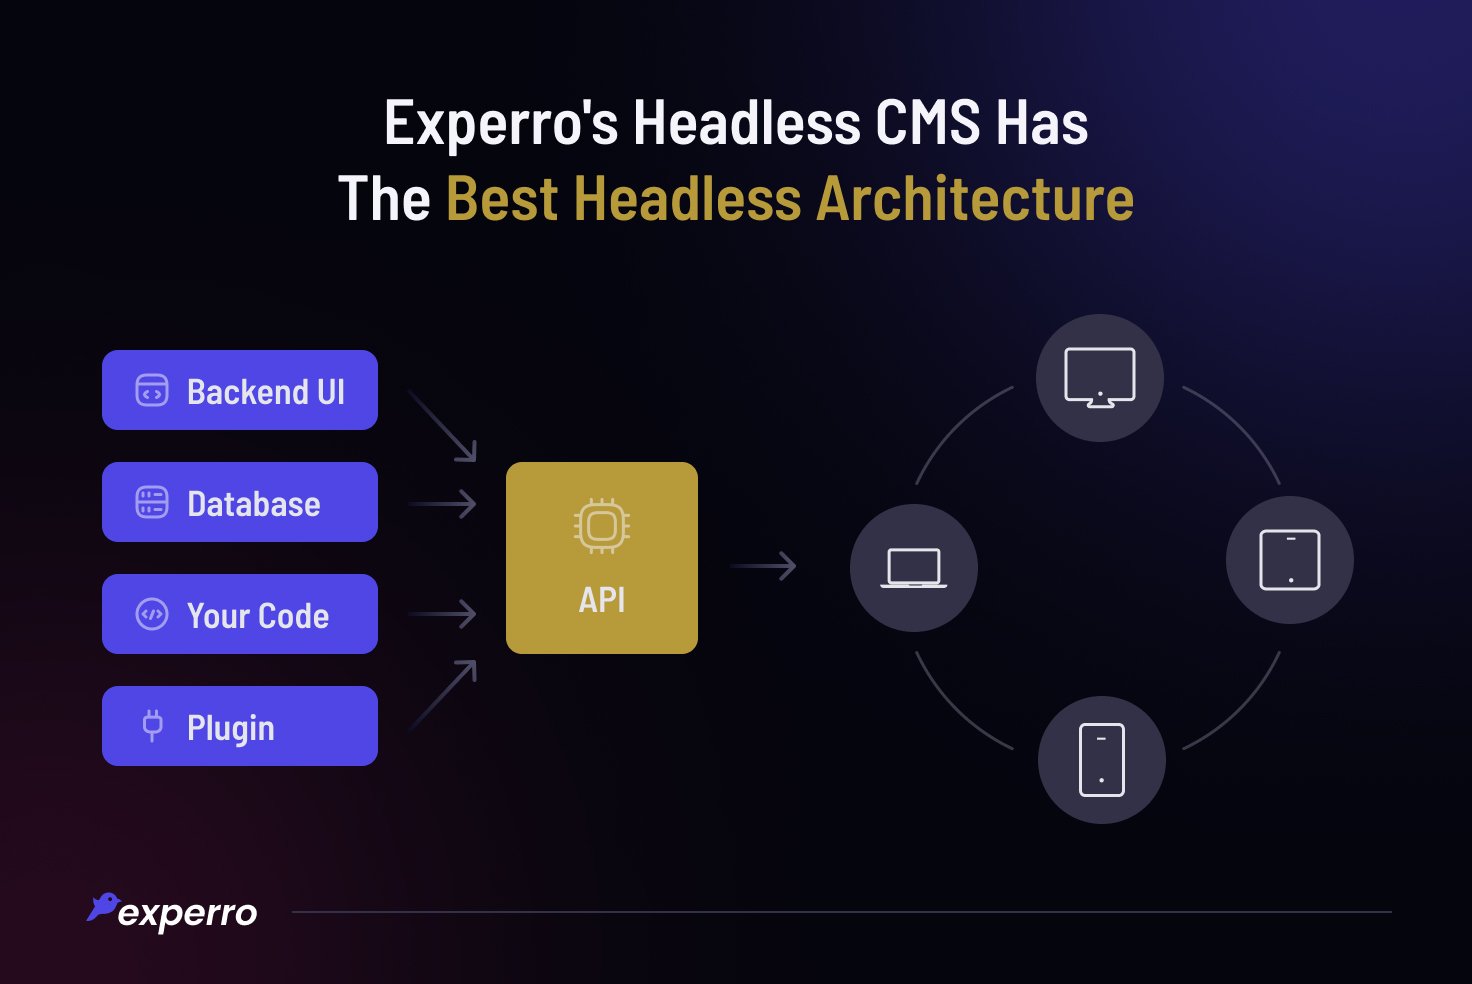 Why Experro's Headless Architecture is Best